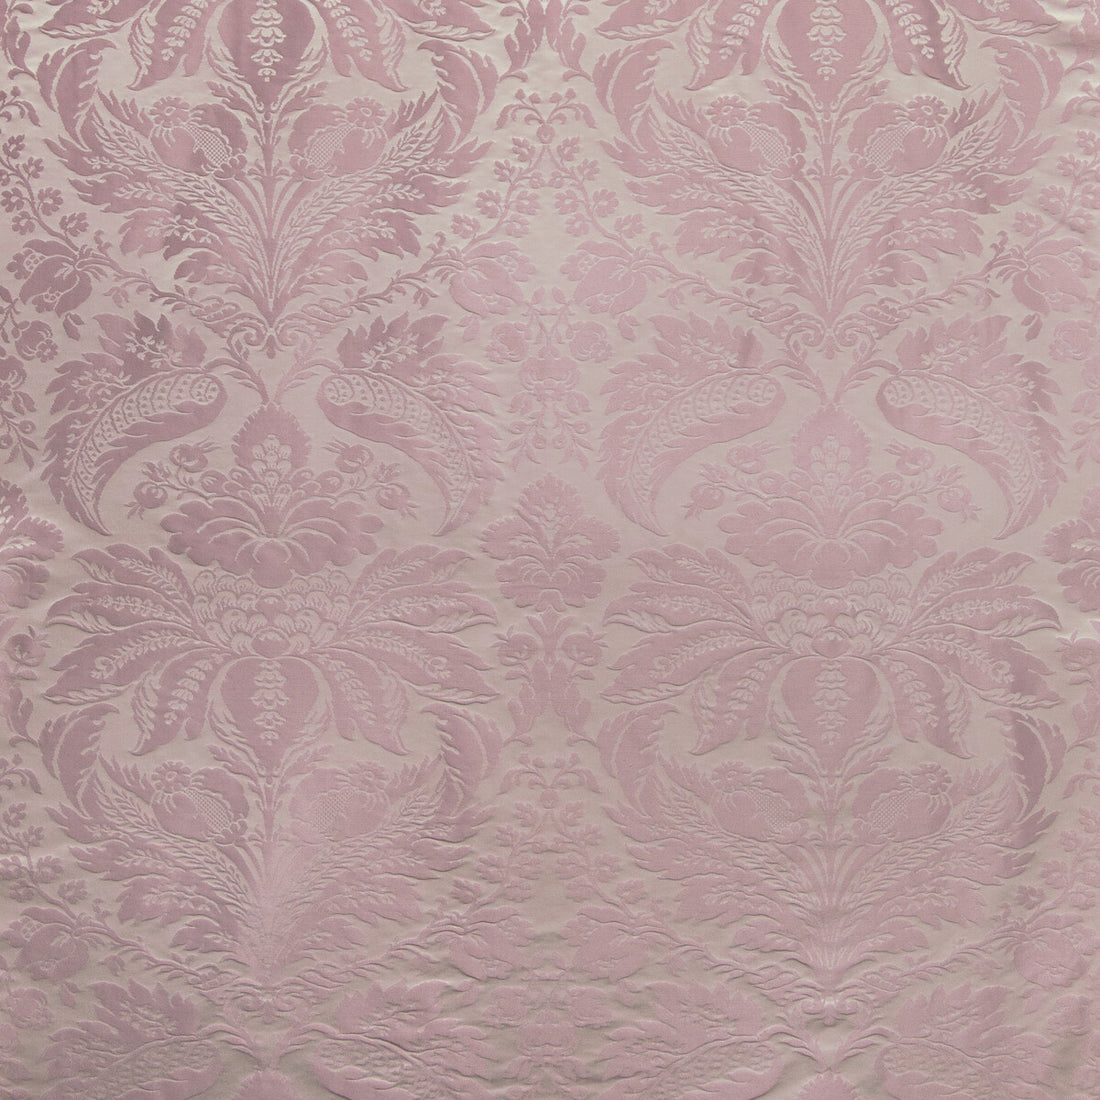 Damask Pierre fabric in amethyst color - pattern 8013188.110.0 - by Brunschwig &amp; Fils in the B&amp;F Showroom Exclusive 2019 collection